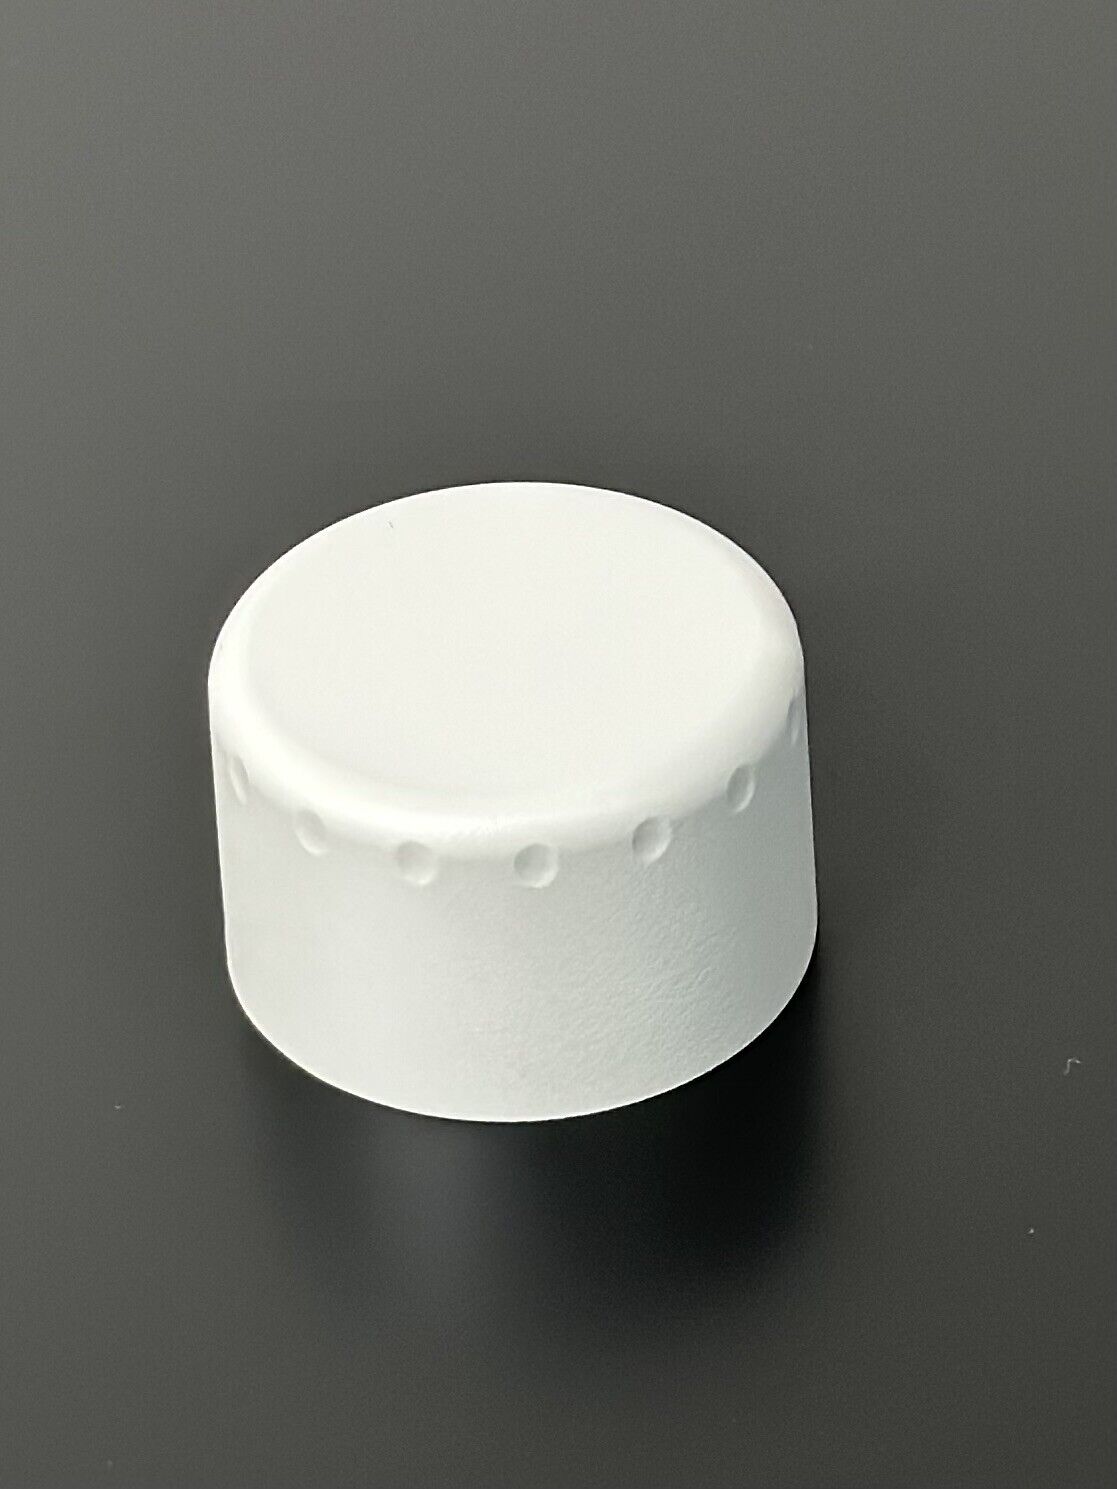 GE Datex Ohmeda Cardiocap/5 Knob 896291-HEL Compatible - Same Day Shipping